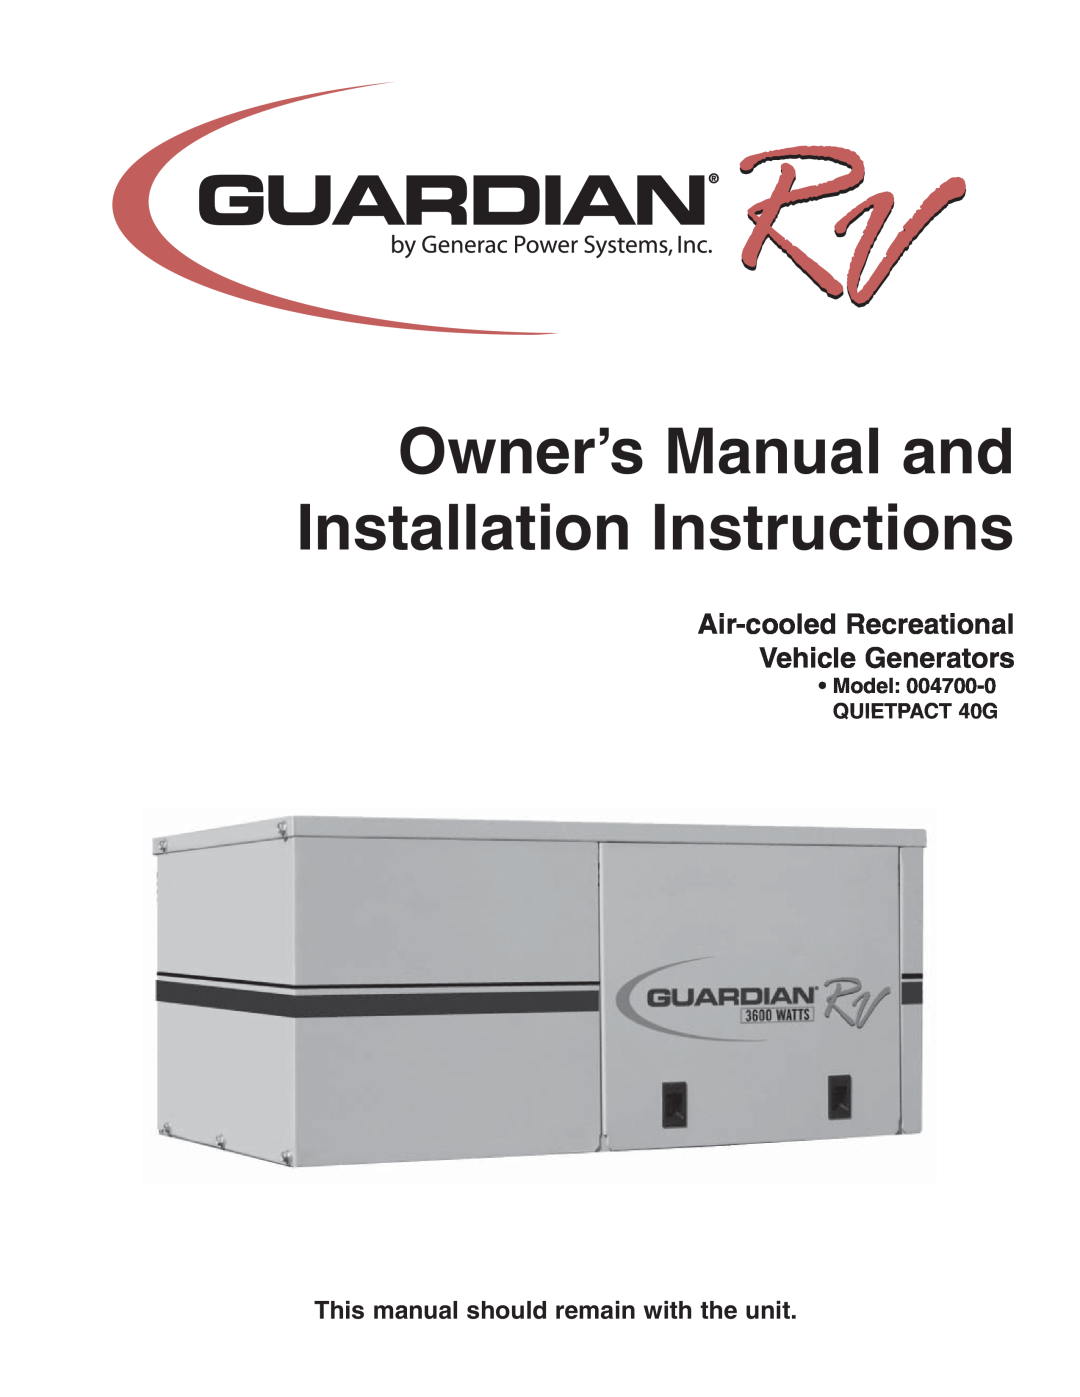 Generac Power Systems 004700-00 owner manual Air-cooled Recreational Vehicle Generators, Model QUIETPACT 40G 